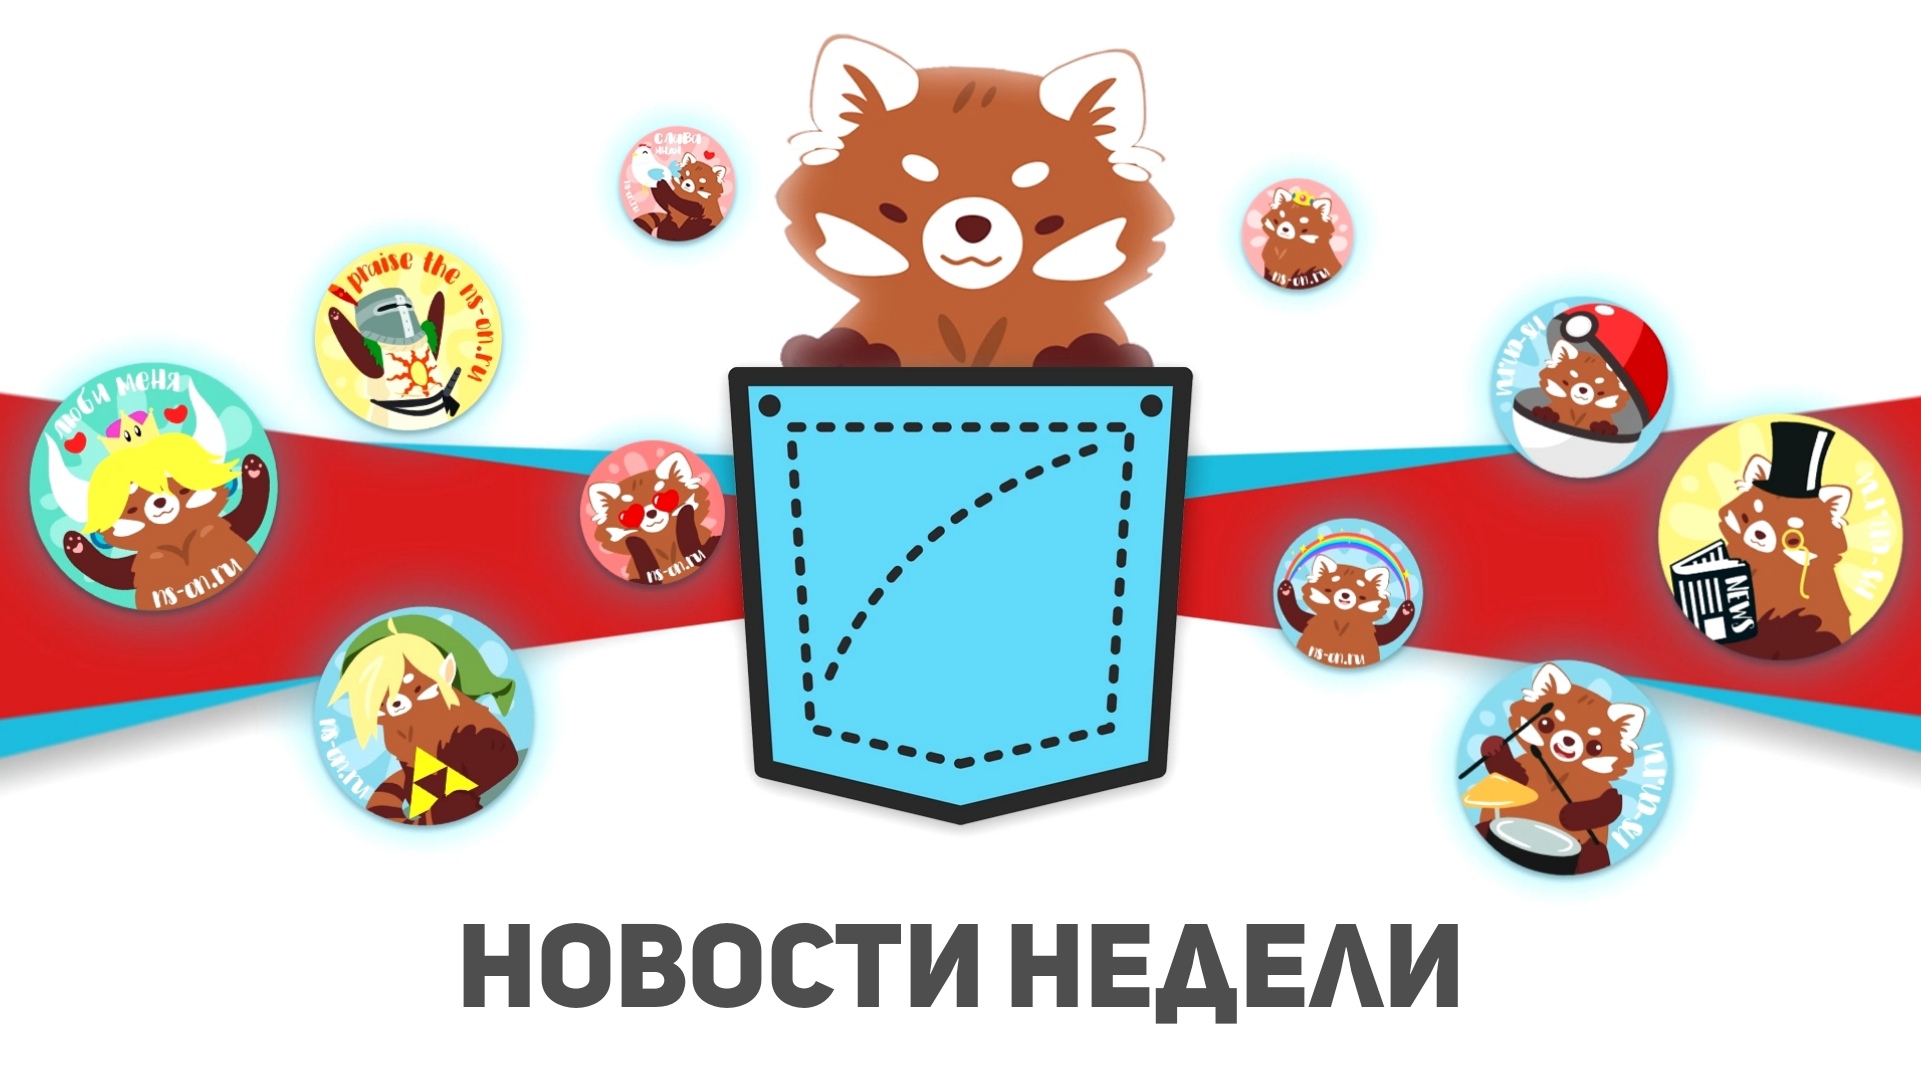 You are currently viewing Новости недели Nintendo Switch (07.03 – 13.03)